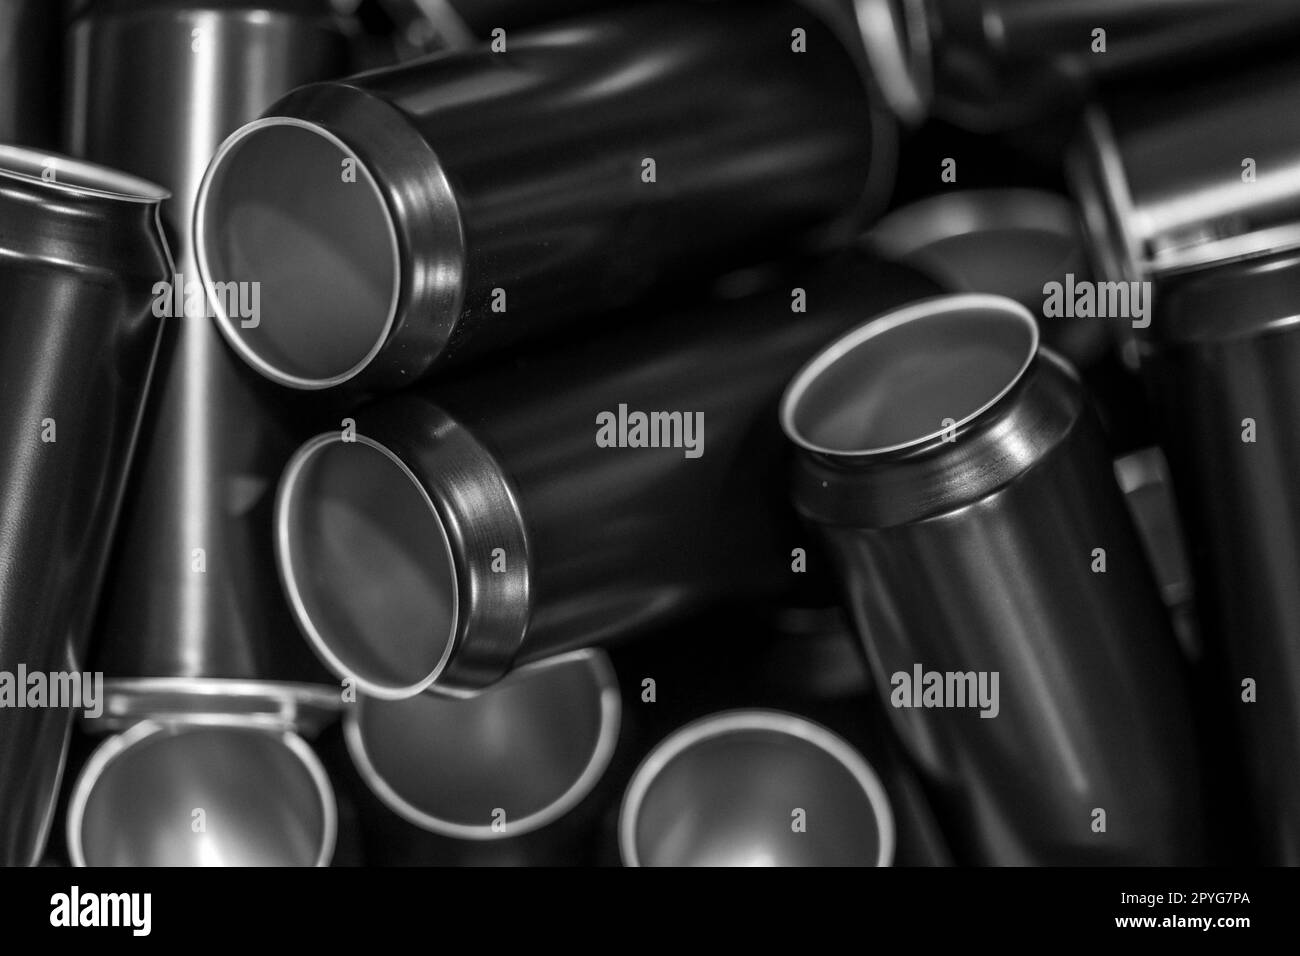 black aluminum drink cans in production Stock Photo